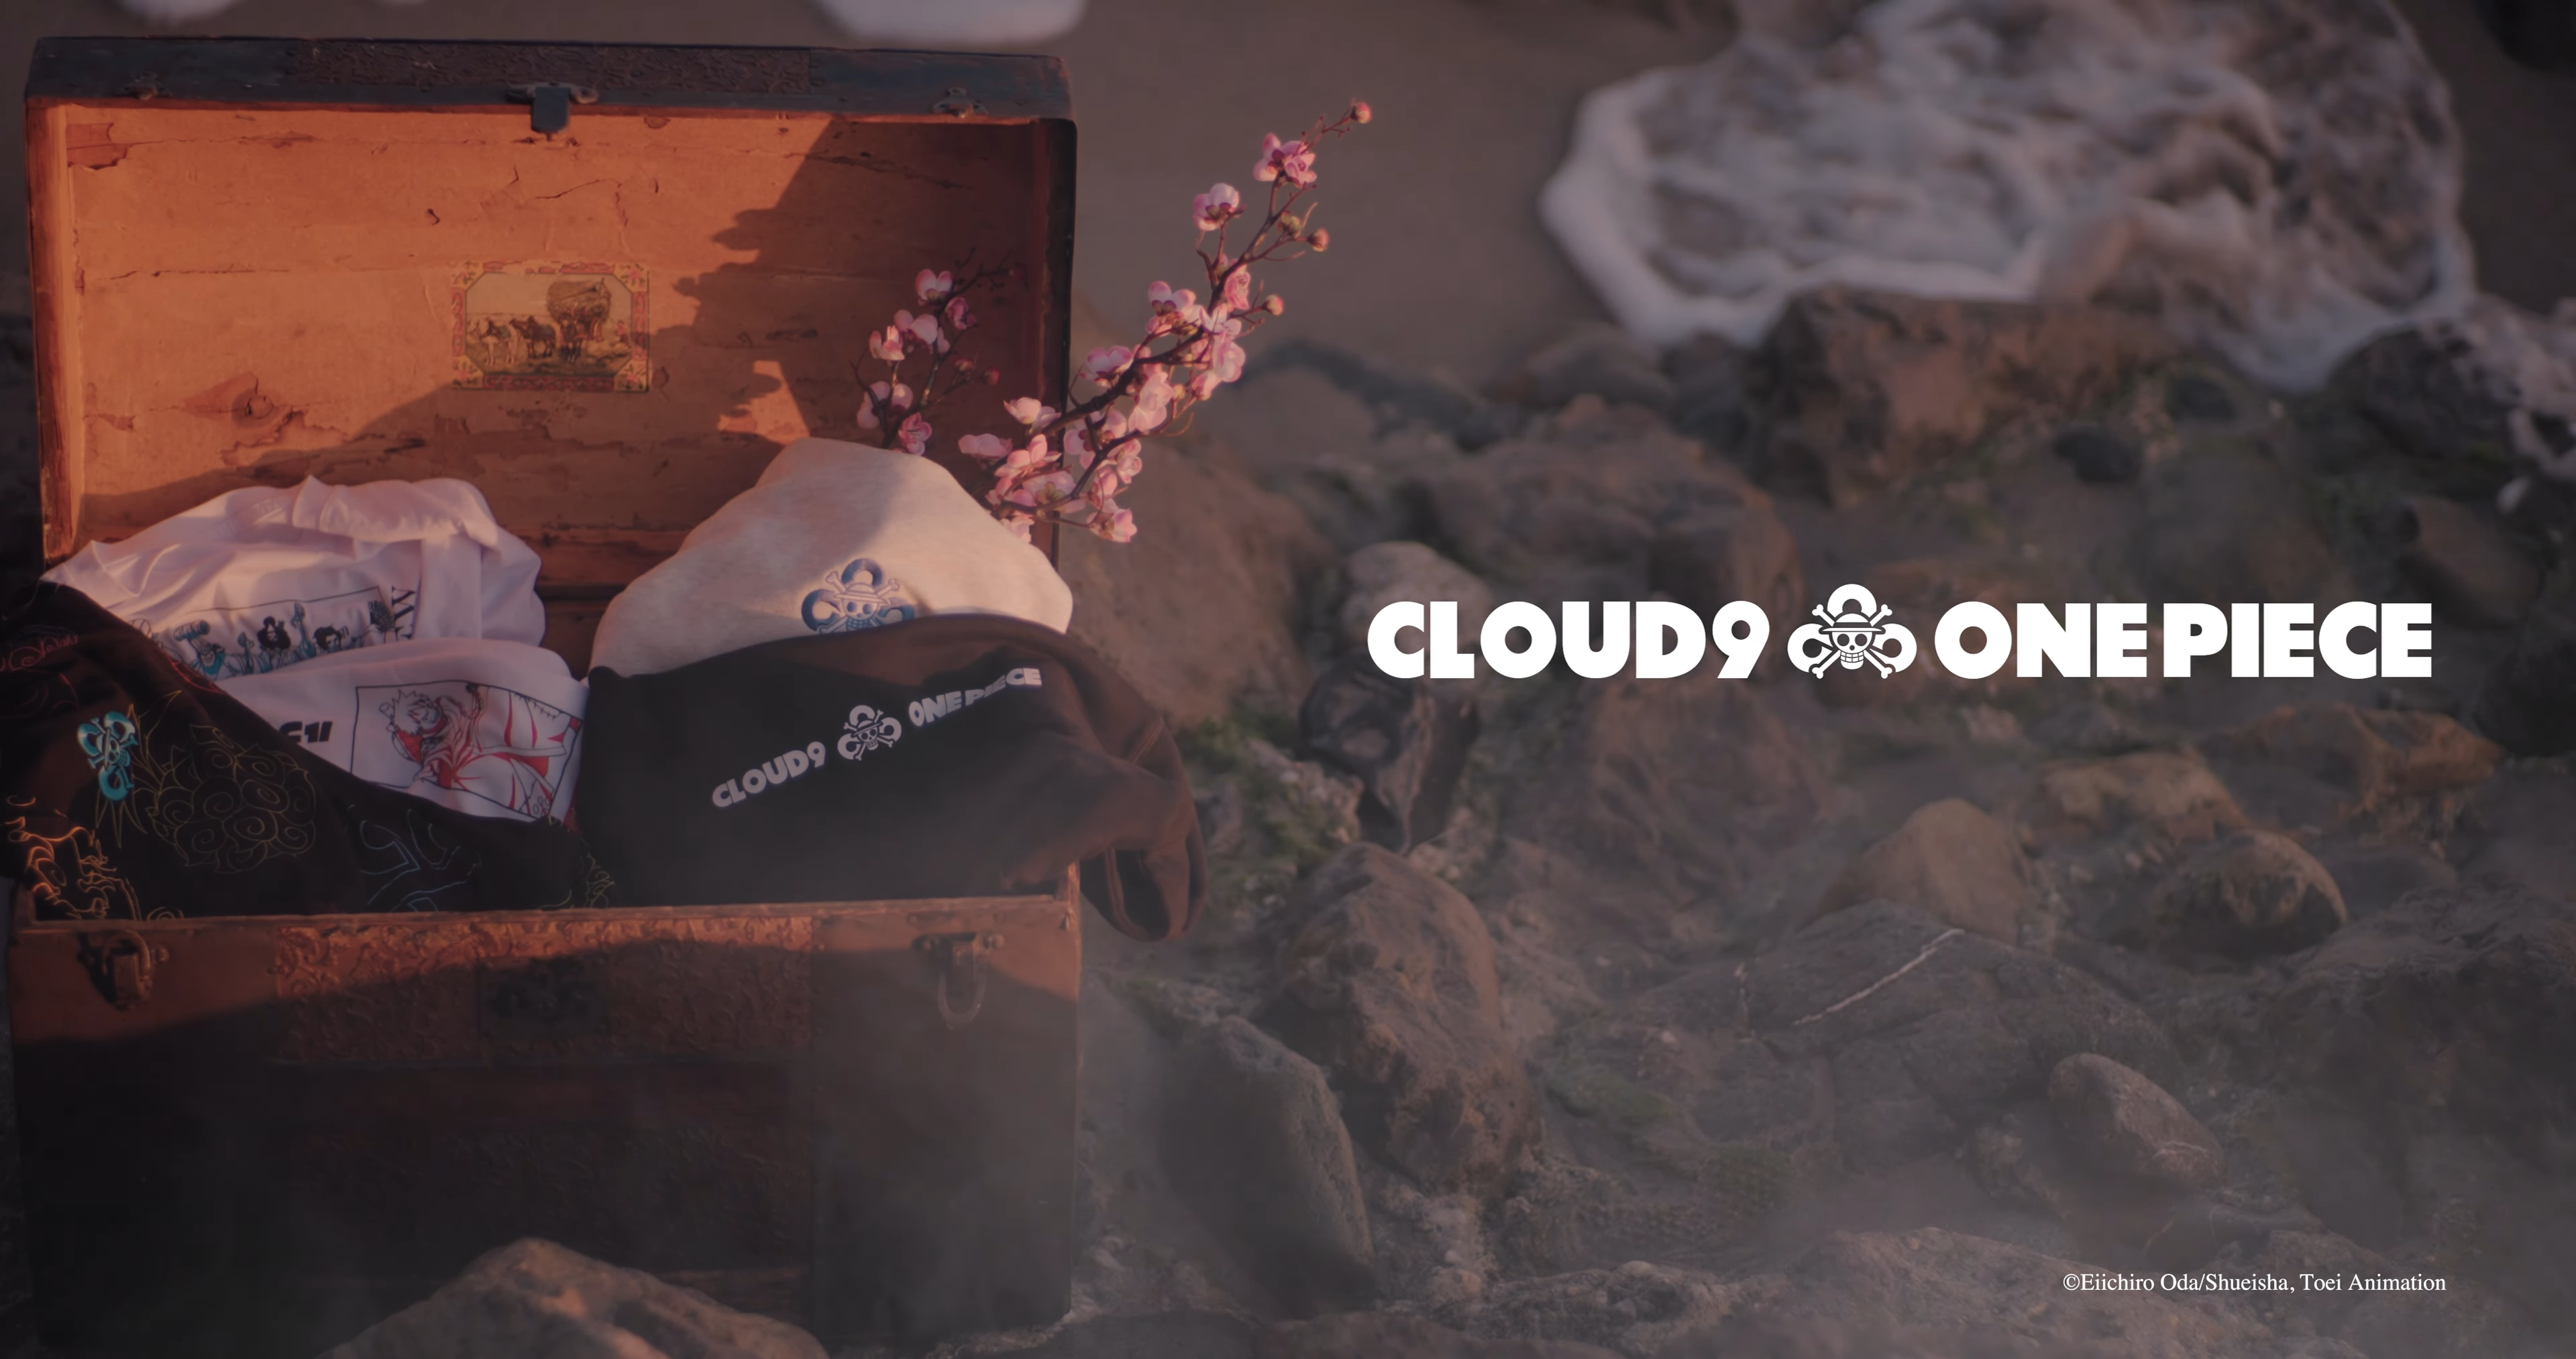 Cloud9 collaborates with One Piece for an upcoming merch drop